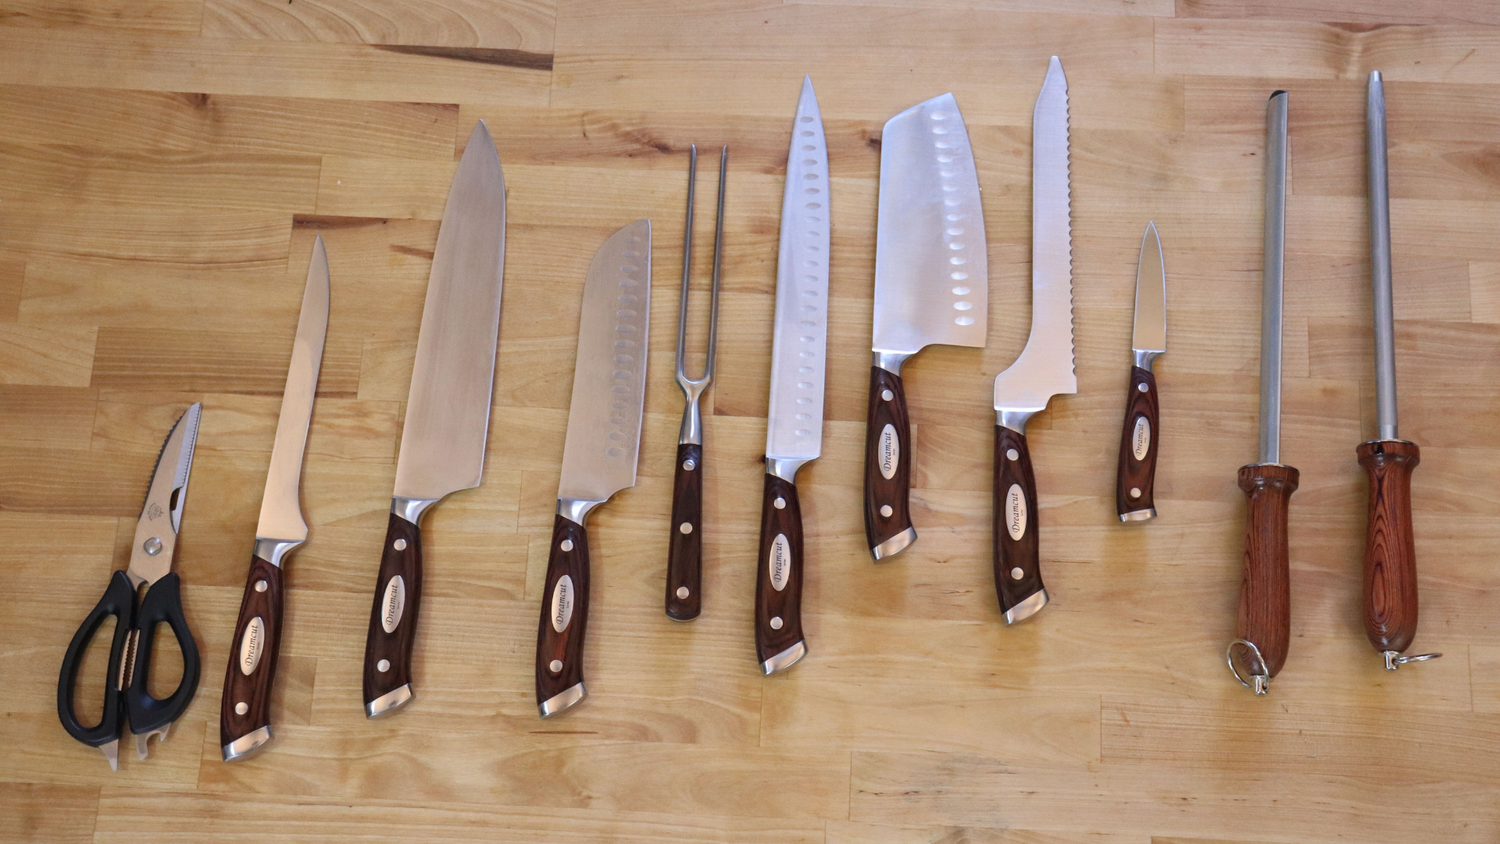 3 day sale  - 19 pc set- 12 pc set plus steak knives,  order today and get a free single Knife